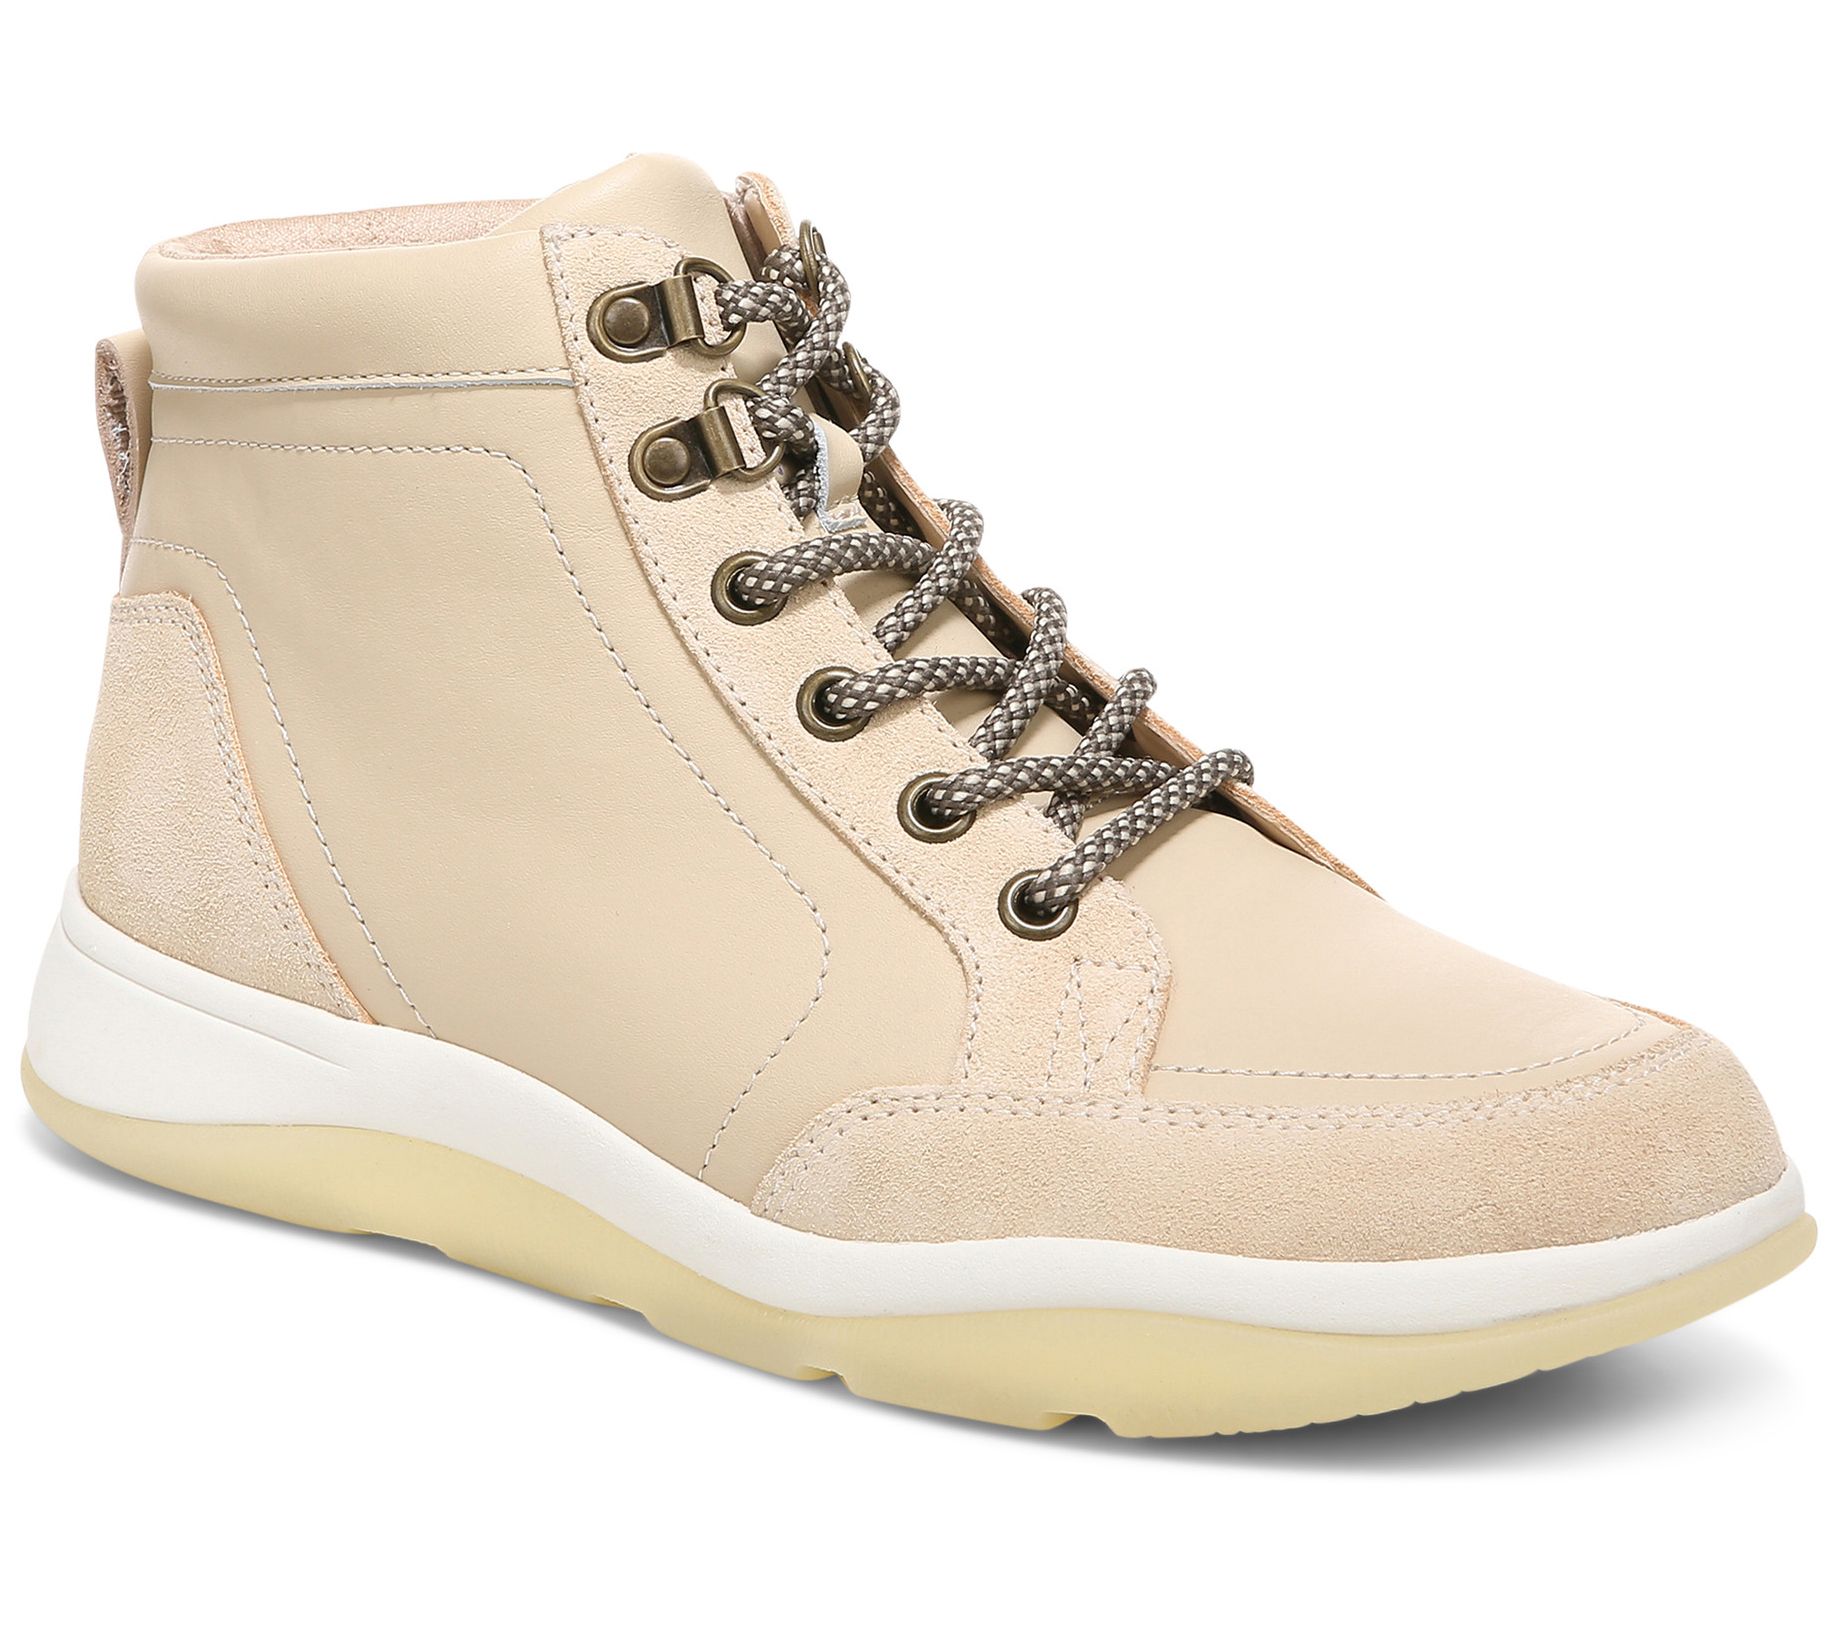 Vionic Women's Whitley Lace-Up Hikers